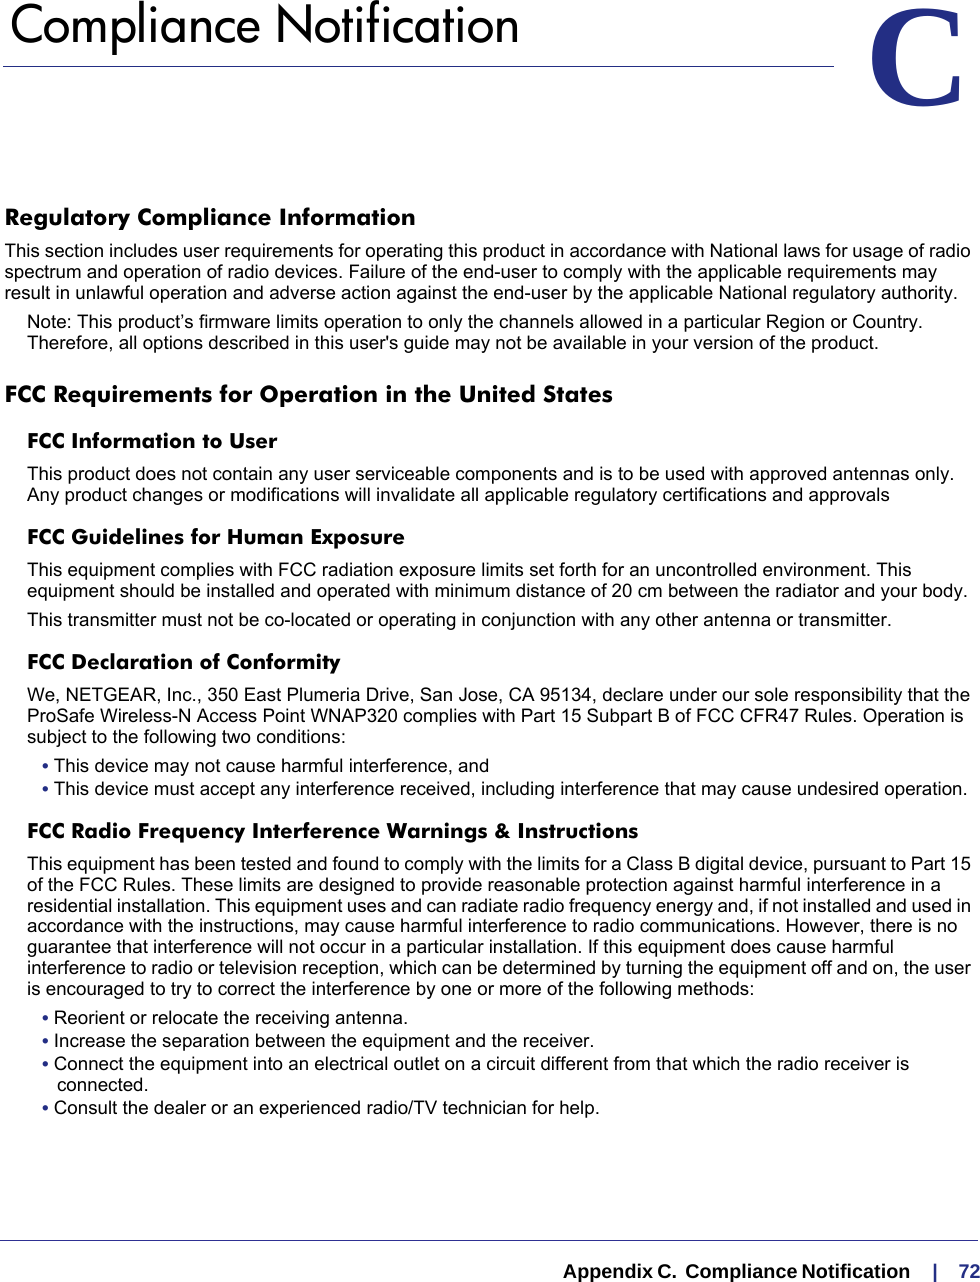   Appendix C.  Compliance Notification     |    72CC.   Compliance NotificationRegulatory Compliance InformationThis section includes user requirements for operating this product in accordance with National laws for usage of radio spectrum and operation of radio devices. Failure of the end-user to comply with the applicable requirements may result in unlawful operation and adverse action against the end-user by the applicable National regulatory authority.Note: This product’s firmware limits operation to only the channels allowed in a particular Region or Country.  Therefore, all options described in this user&apos;s guide may not be available in your version of the product.FCC Requirements for Operation in the United States FCC Information to UserThis product does not contain any user serviceable components and is to be used with approved antennas only. Any product changes or modifications will invalidate all applicable regulatory certifications and approvalsFCC Guidelines for Human ExposureThis equipment complies with FCC radiation exposure limits set forth for an uncontrolled environment. This equipment should be installed and operated with minimum distance of 20 cm between the radiator and your body. This transmitter must not be co-located or operating in conjunction with any other antenna or transmitter. FCC Declaration of ConformityWe, NETGEAR, Inc., 350 East Plumeria Drive, San Jose, CA 95134, declare under our sole responsibility that the ProSafe Wireless-N Access Point WNAP320 complies with Part 15 Subpart B of FCC CFR47 Rules. Operation is subject to the following two conditions:• This device may not cause harmful interference, and• This device must accept any interference received, including interference that may cause undesired operation.FCC Radio Frequency Interference Warnings &amp; InstructionsThis equipment has been tested and found to comply with the limits for a Class B digital device, pursuant to Part 15 of the FCC Rules. These limits are designed to provide reasonable protection against harmful interference in a residential installation. This equipment uses and can radiate radio frequency energy and, if not installed and used in accordance with the instructions, may cause harmful interference to radio communications. However, there is no guarantee that interference will not occur in a particular installation. If this equipment does cause harmful interference to radio or television reception, which can be determined by turning the equipment off and on, the user is encouraged to try to correct the interference by one or more of the following methods:• Reorient or relocate the receiving antenna.• Increase the separation between the equipment and the receiver.• Connect the equipment into an electrical outlet on a circuit different from that which the radio receiver is connected.• Consult the dealer or an experienced radio/TV technician for help.